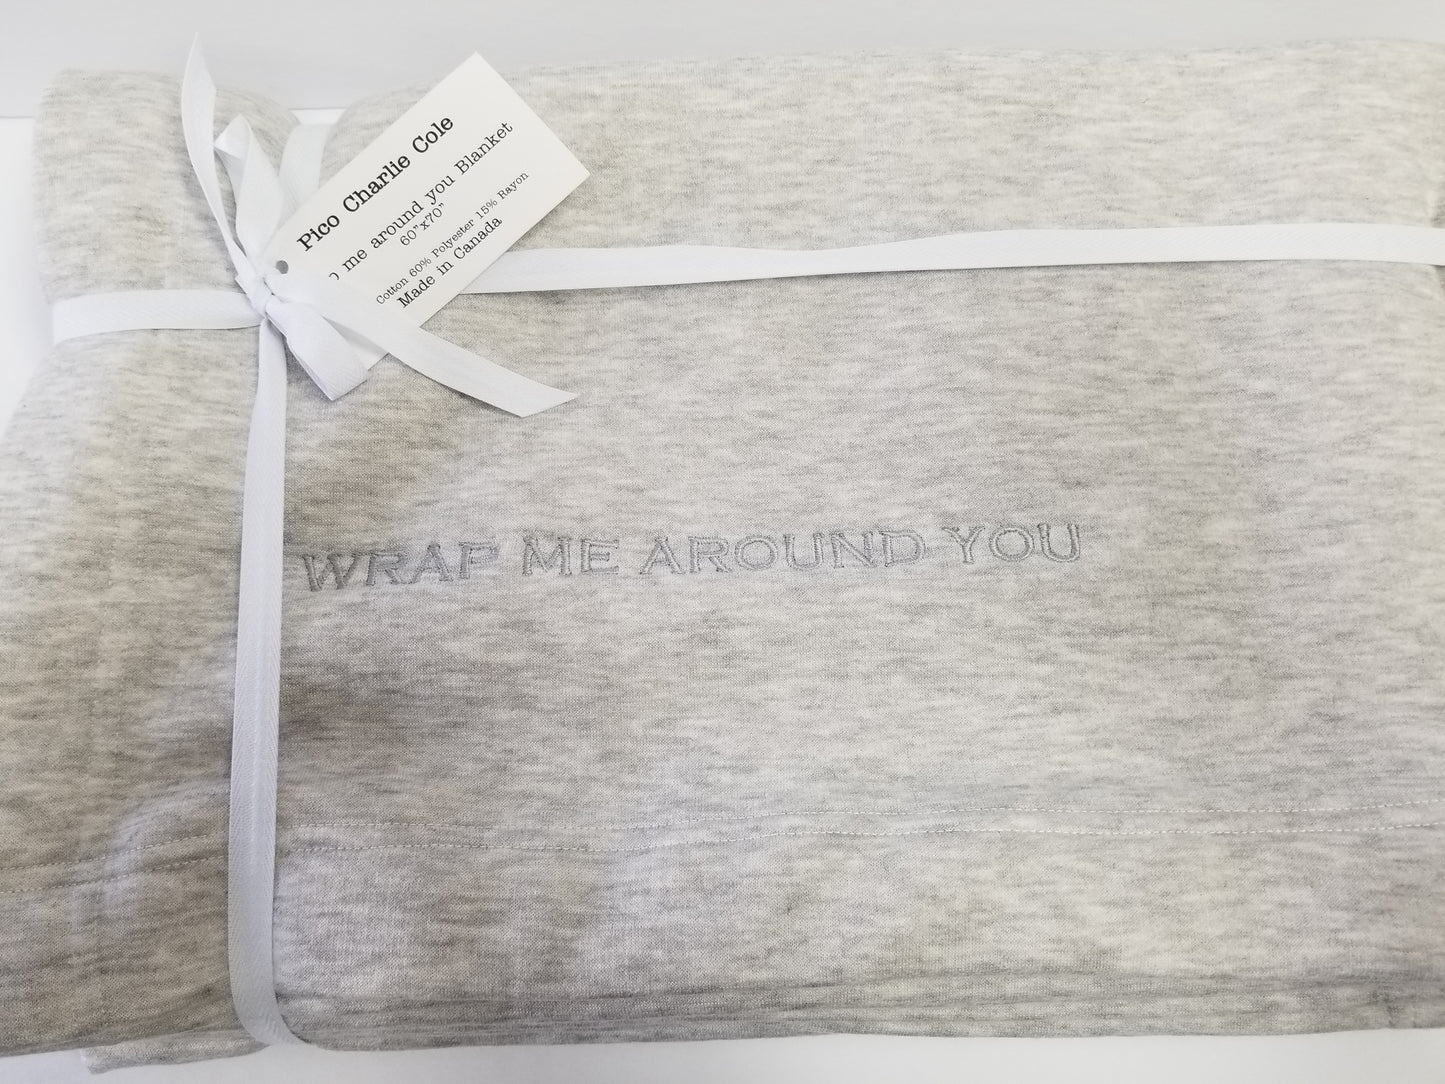 Wrap Me Around You Adult Blanket